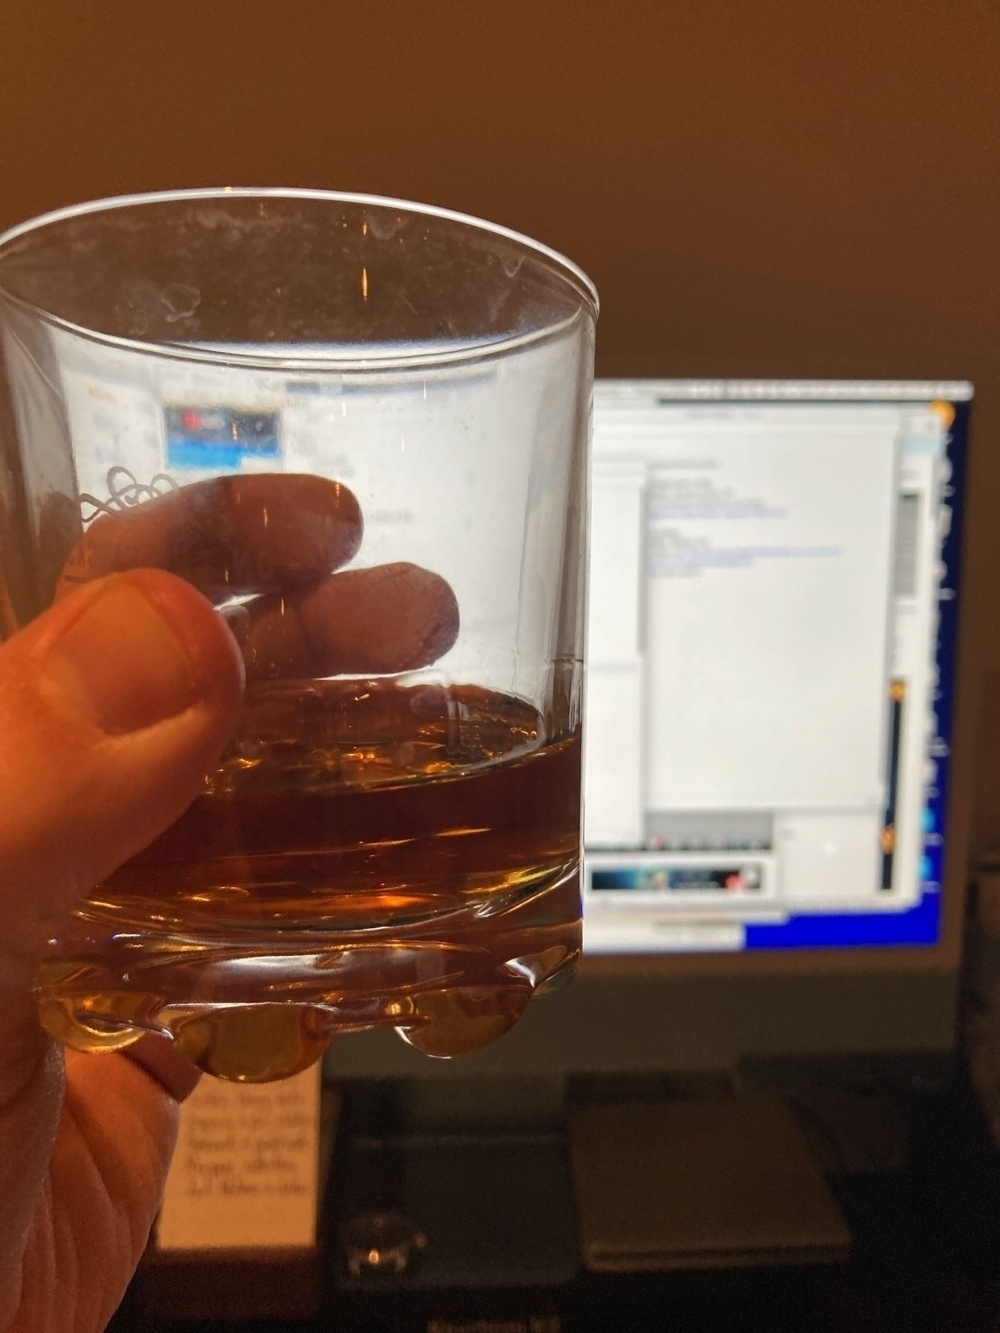 A glass of whisky, held in front of an iMac with the screen blurred in the background.